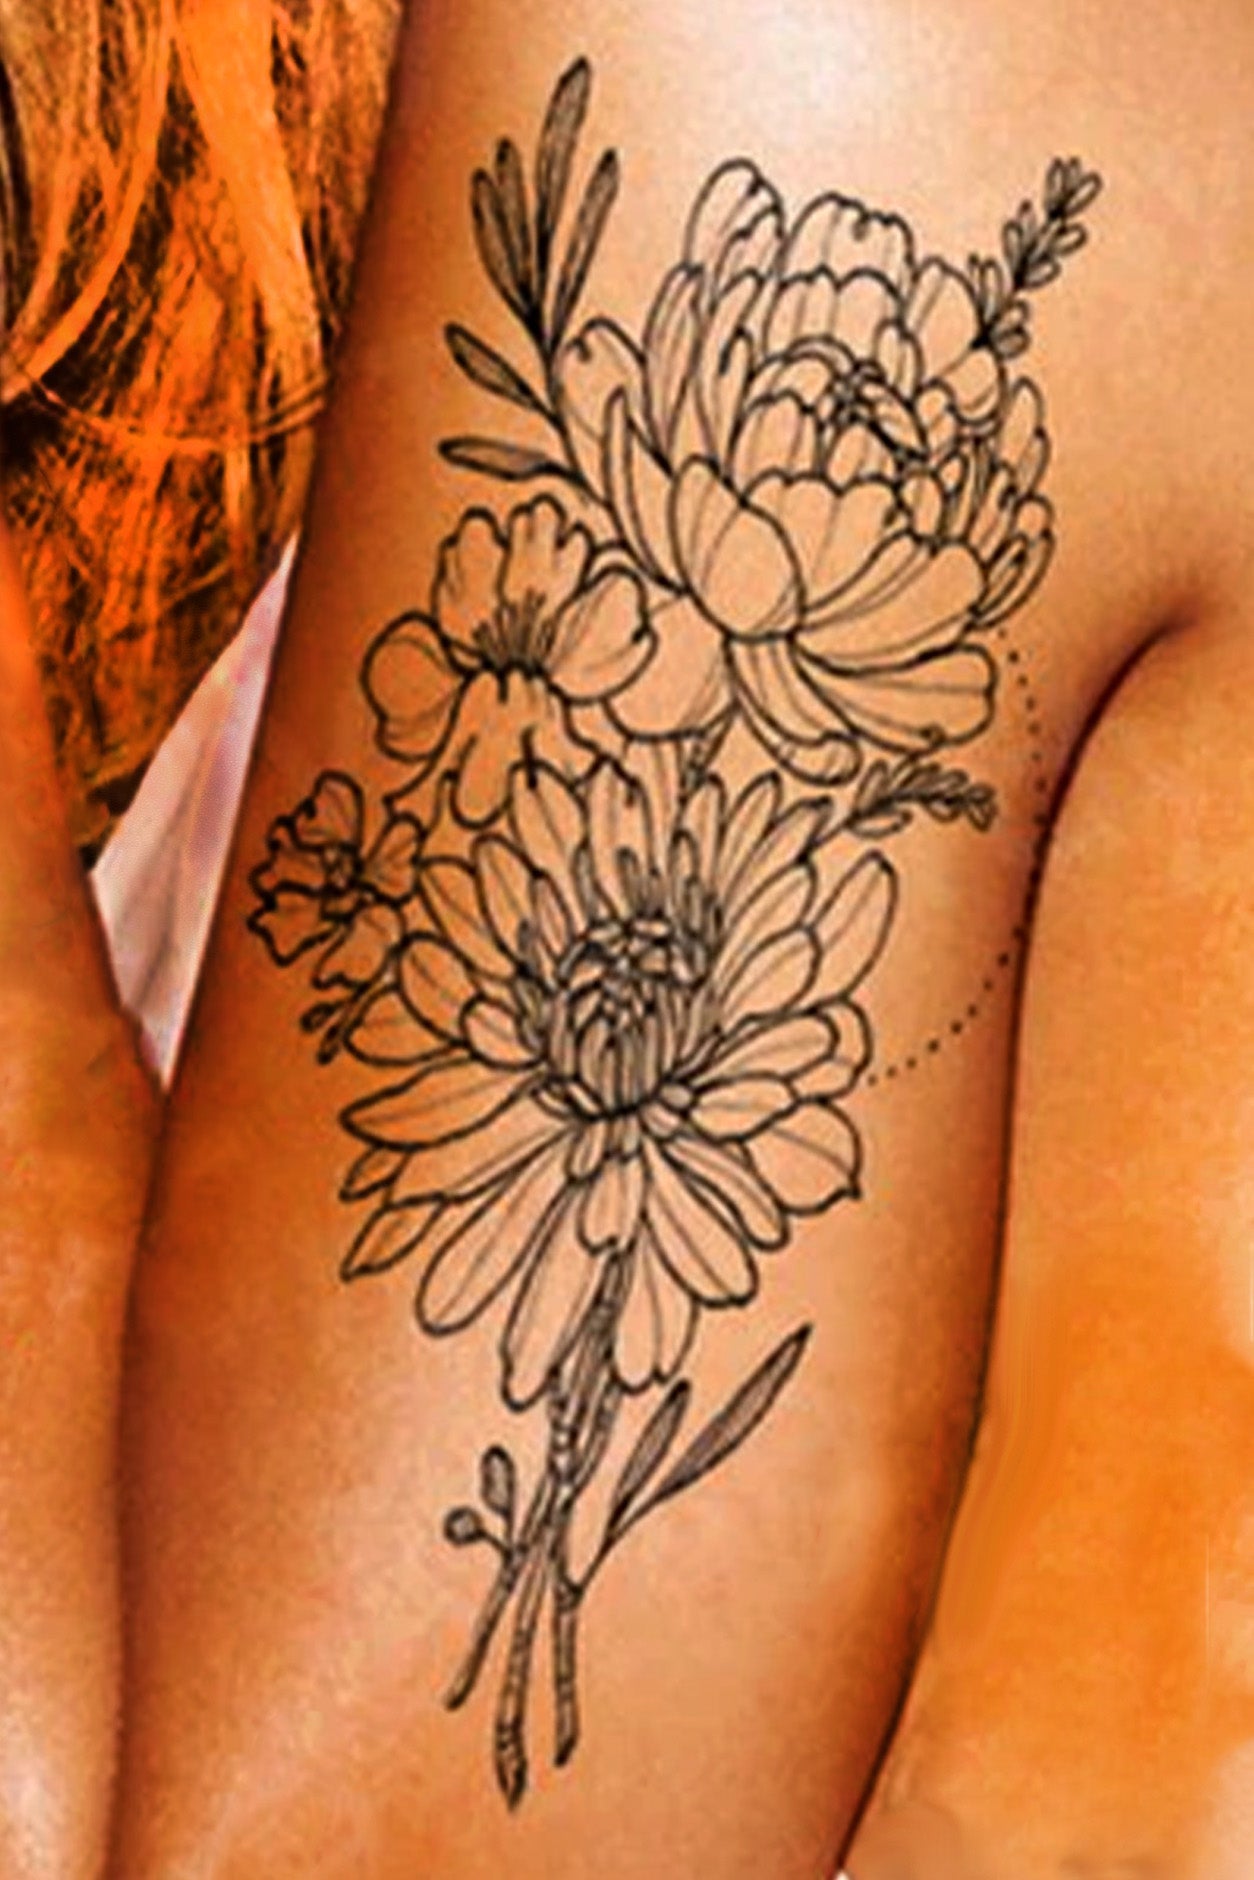 A gender-neutral arm displays the chrysanthemum bouquet artwork done in a traditionl black ink tattoo style.